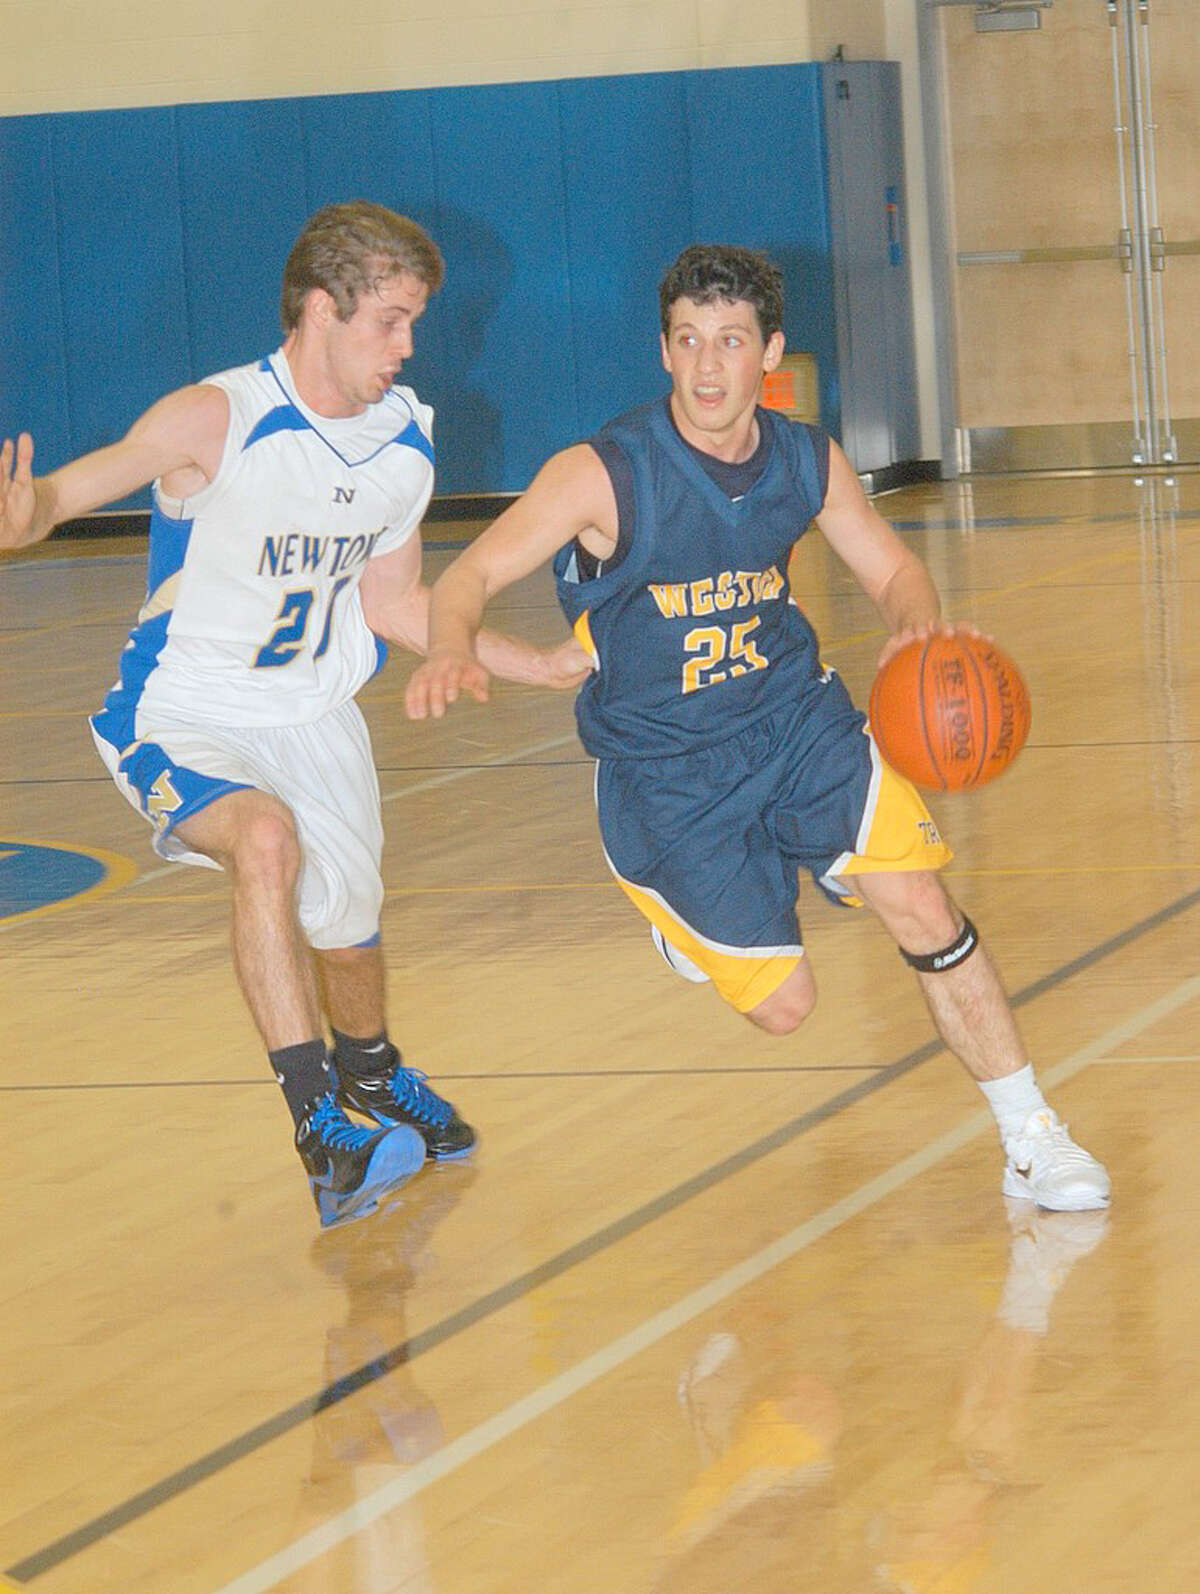 Weston junior Max Molinsky tries to drive past Newtown senior co-captain Josh Engler on Monday in a 55-25 loss to the Nighthawks.